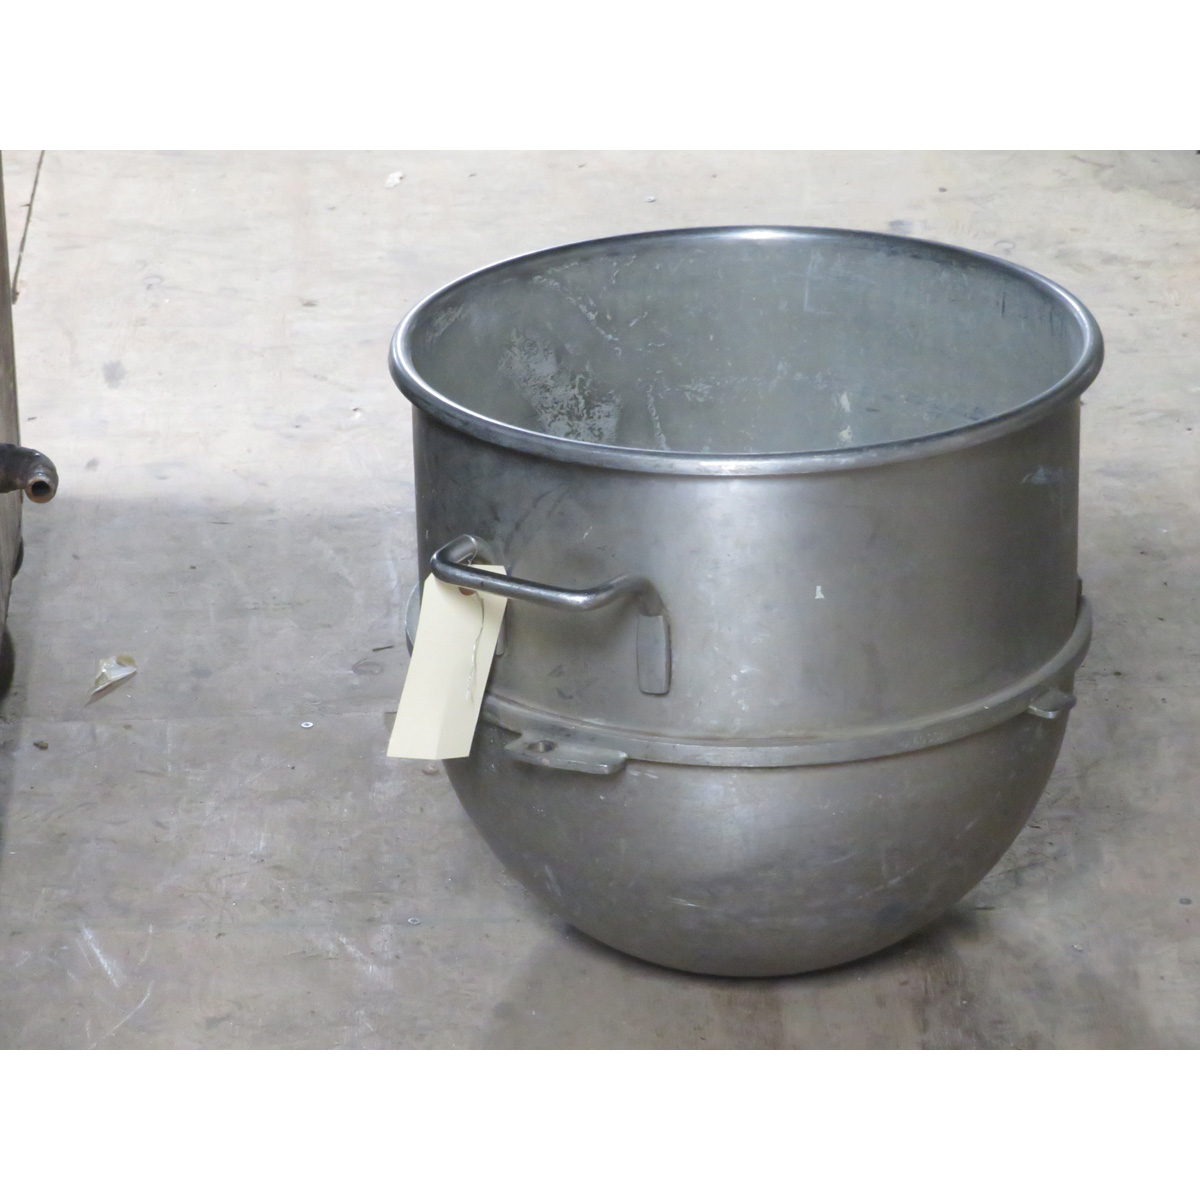 Hobart 00-275686 VMLHP40 40-Quart Bowl for 80 to 40 Bowl Adapter, Used Excellent Condition image 1